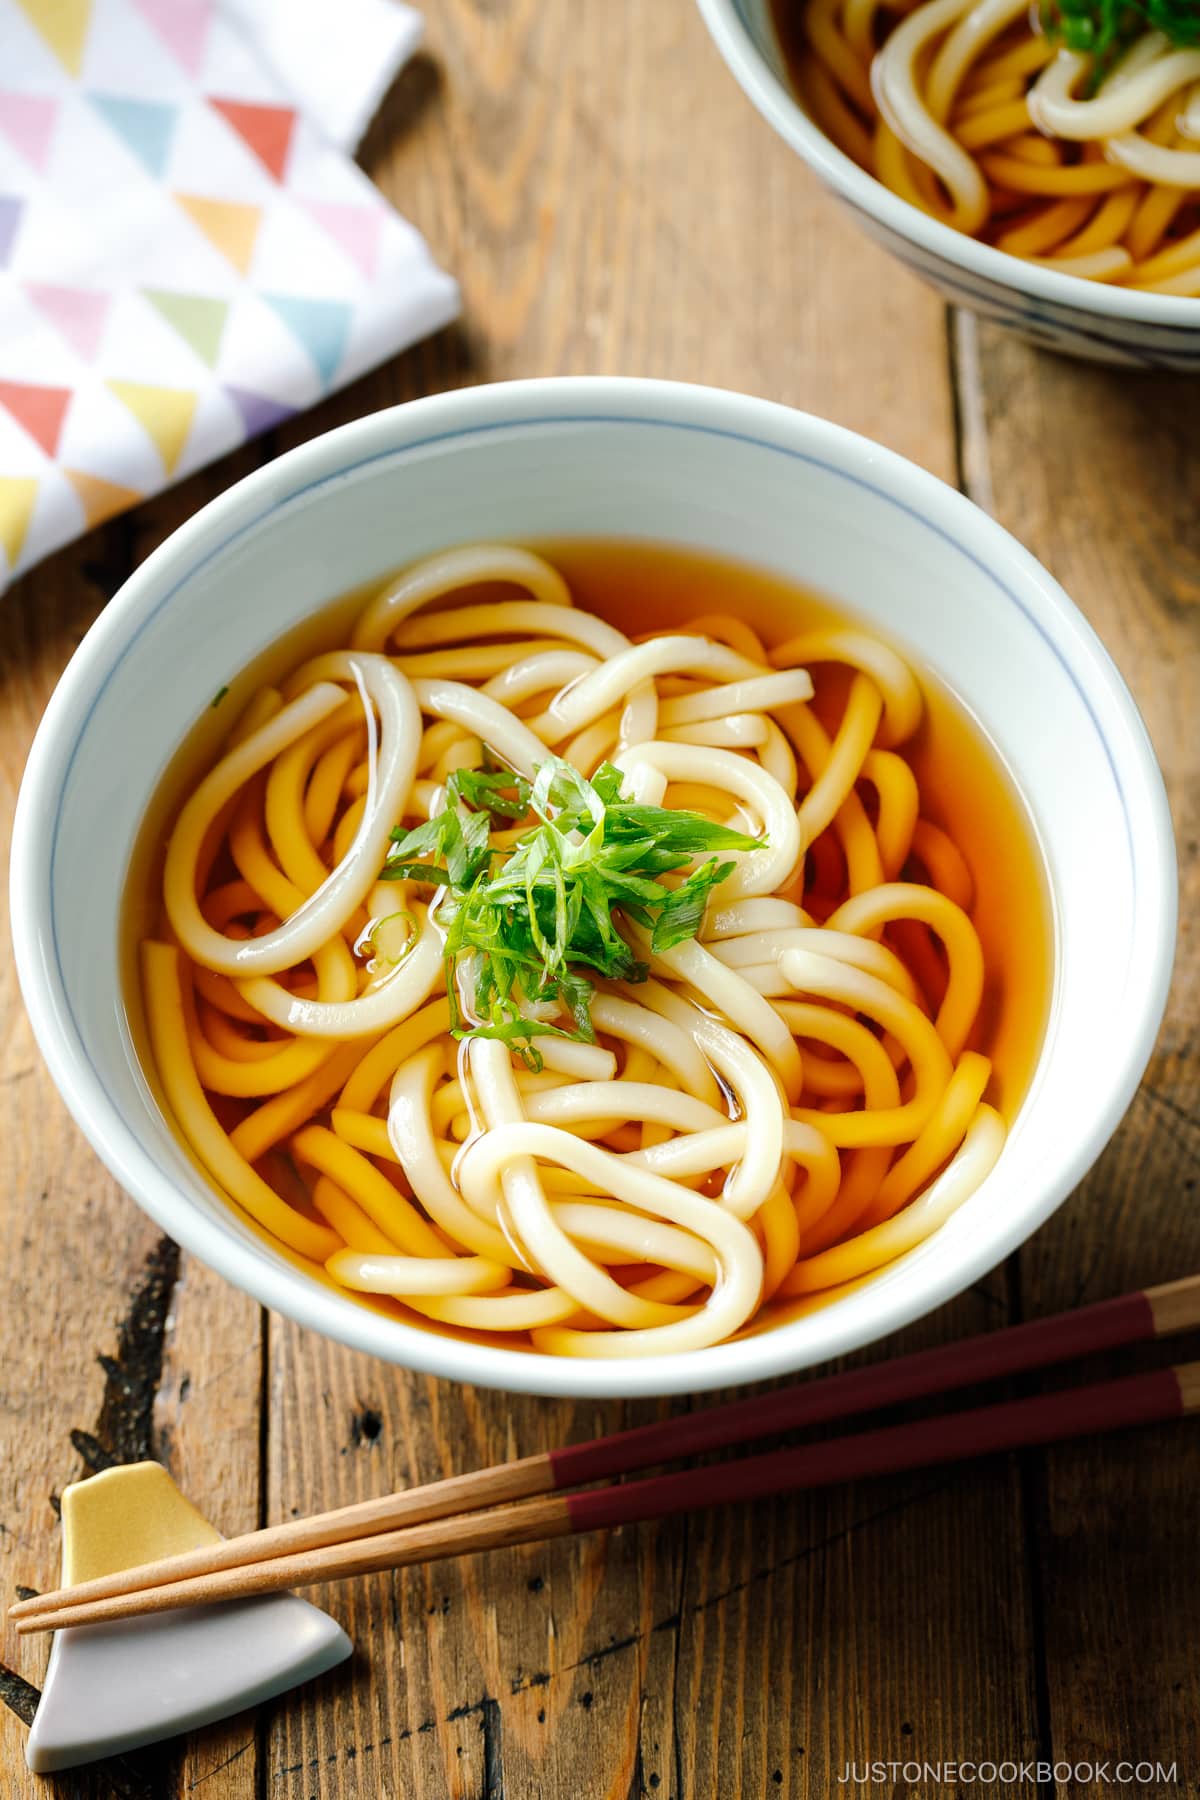 Japanese bowls containing Classic Udon Noodle Soup called Kake Udon or Su Udon, topped with sliced green onion.